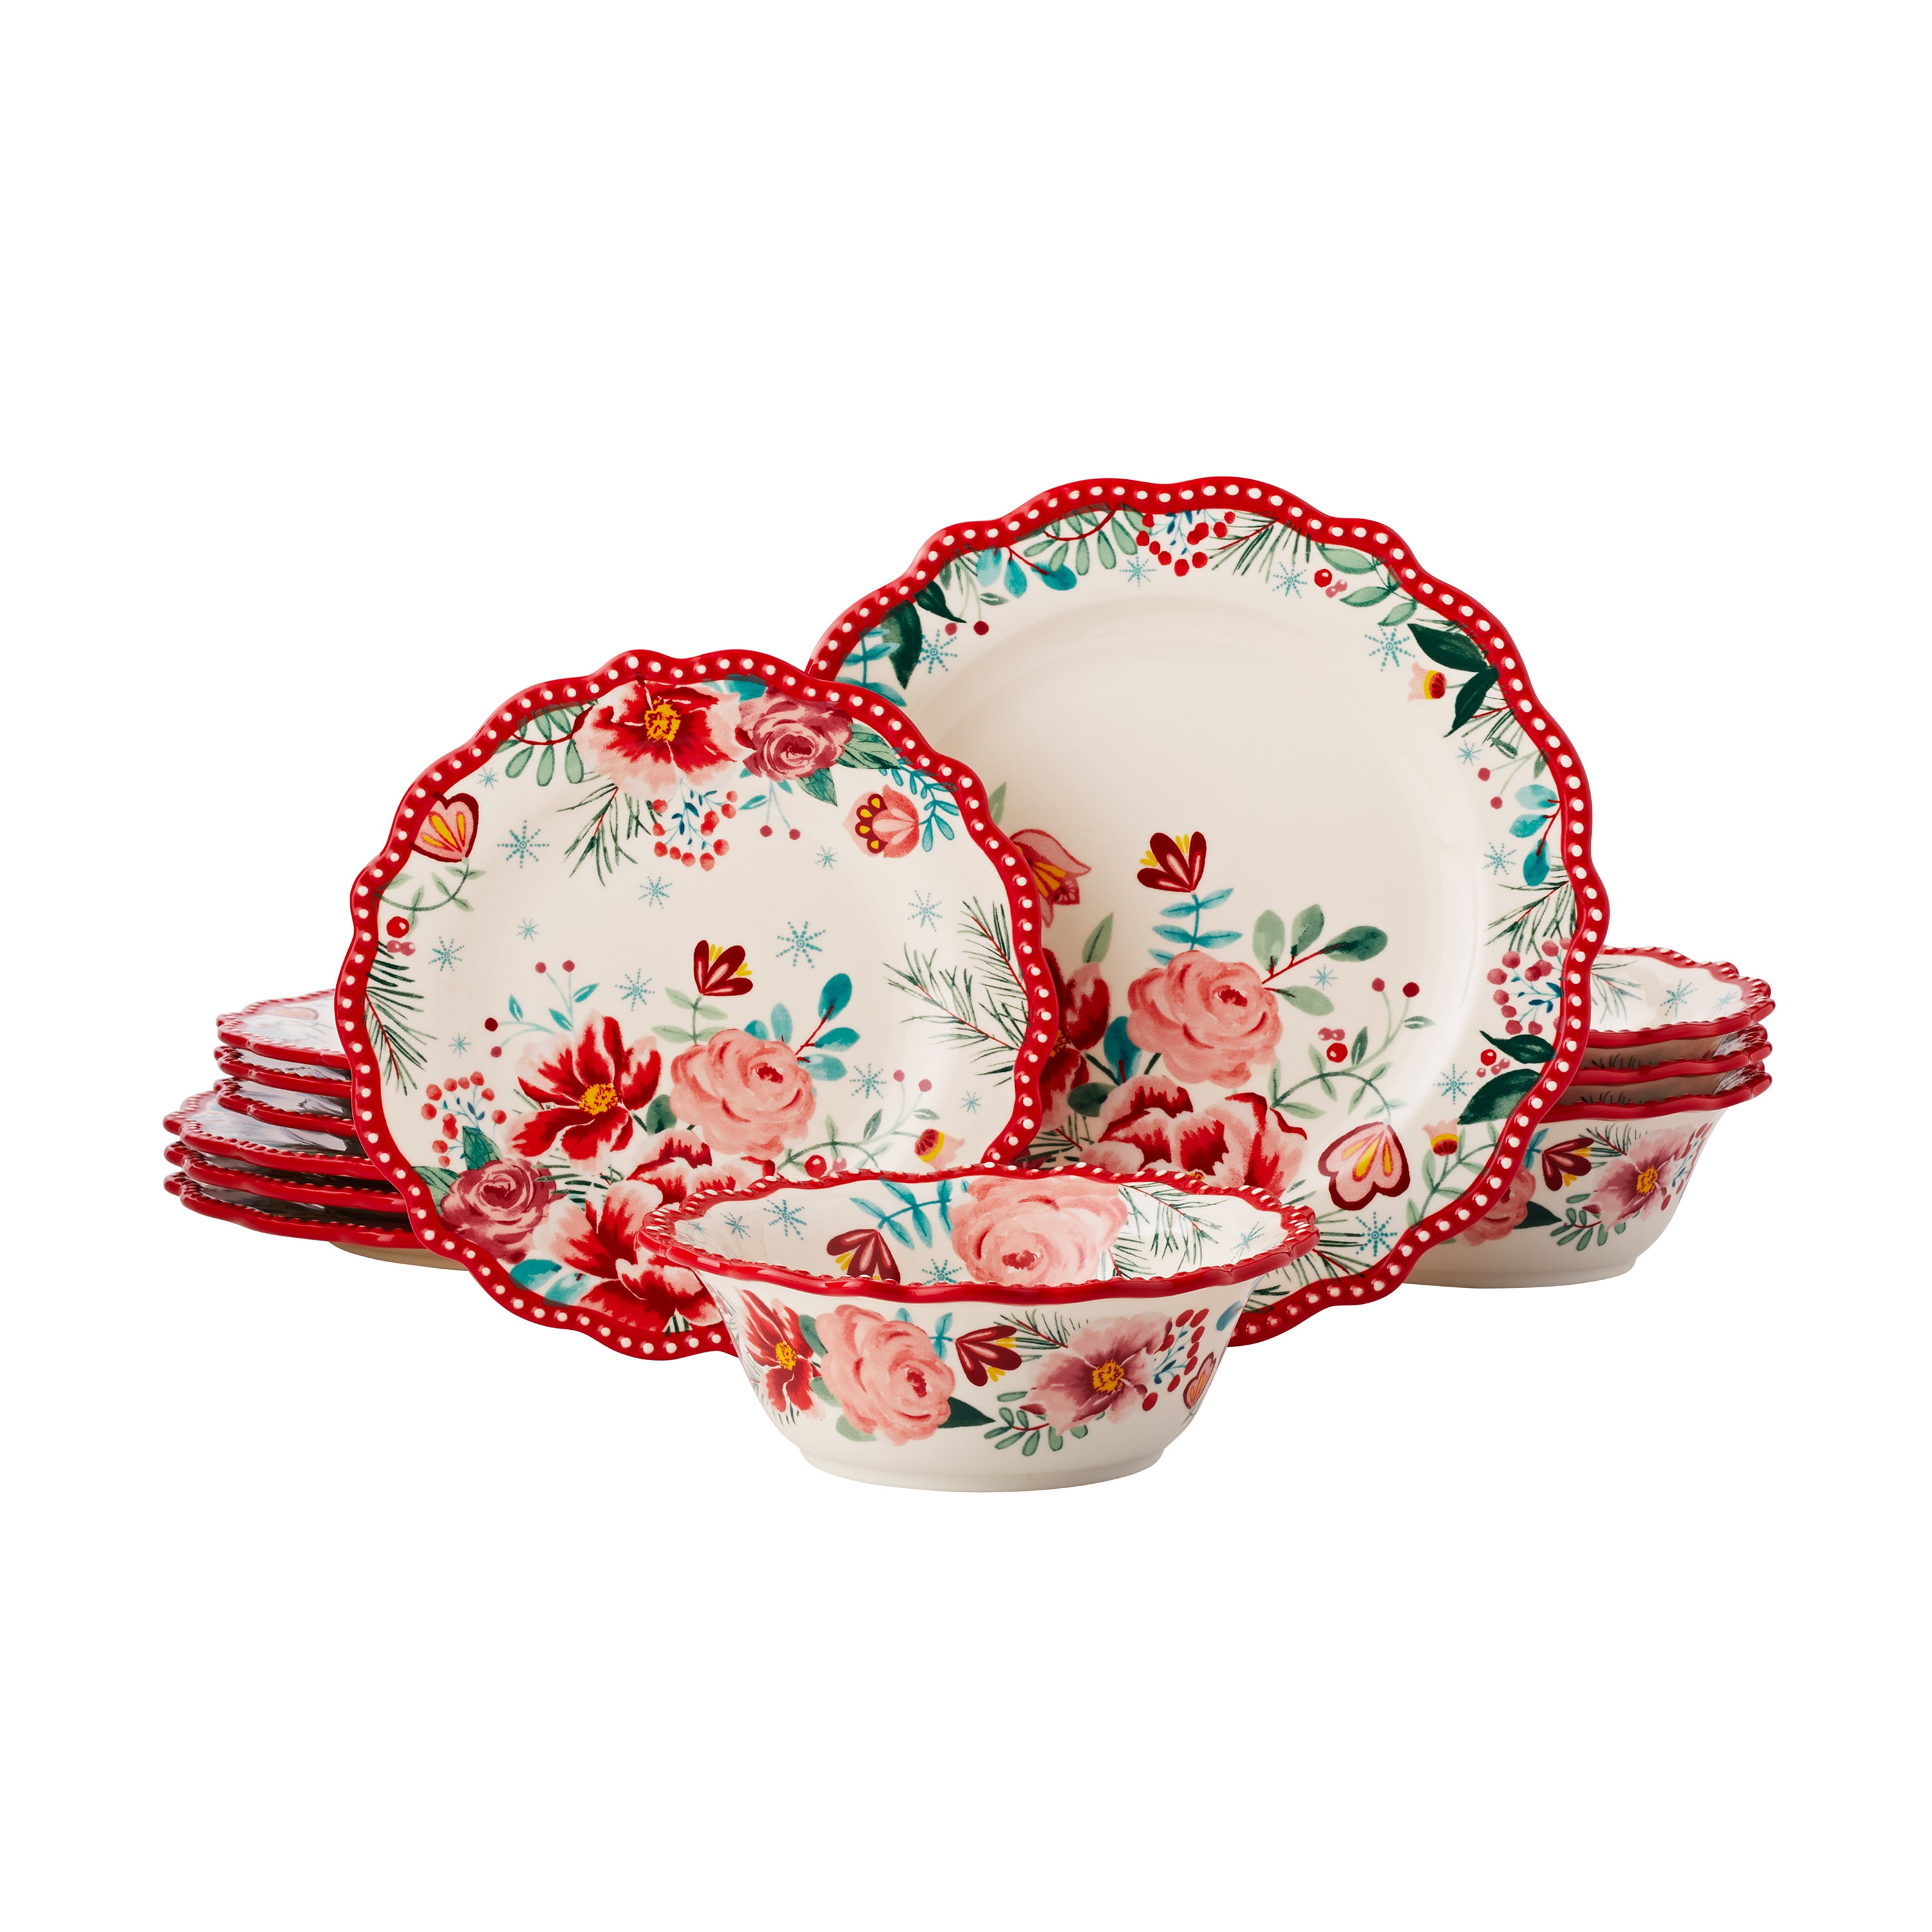 The Pioneer Woman's Gift Guide Is Filled With Dishware, Accessories, And  More Starting At $11